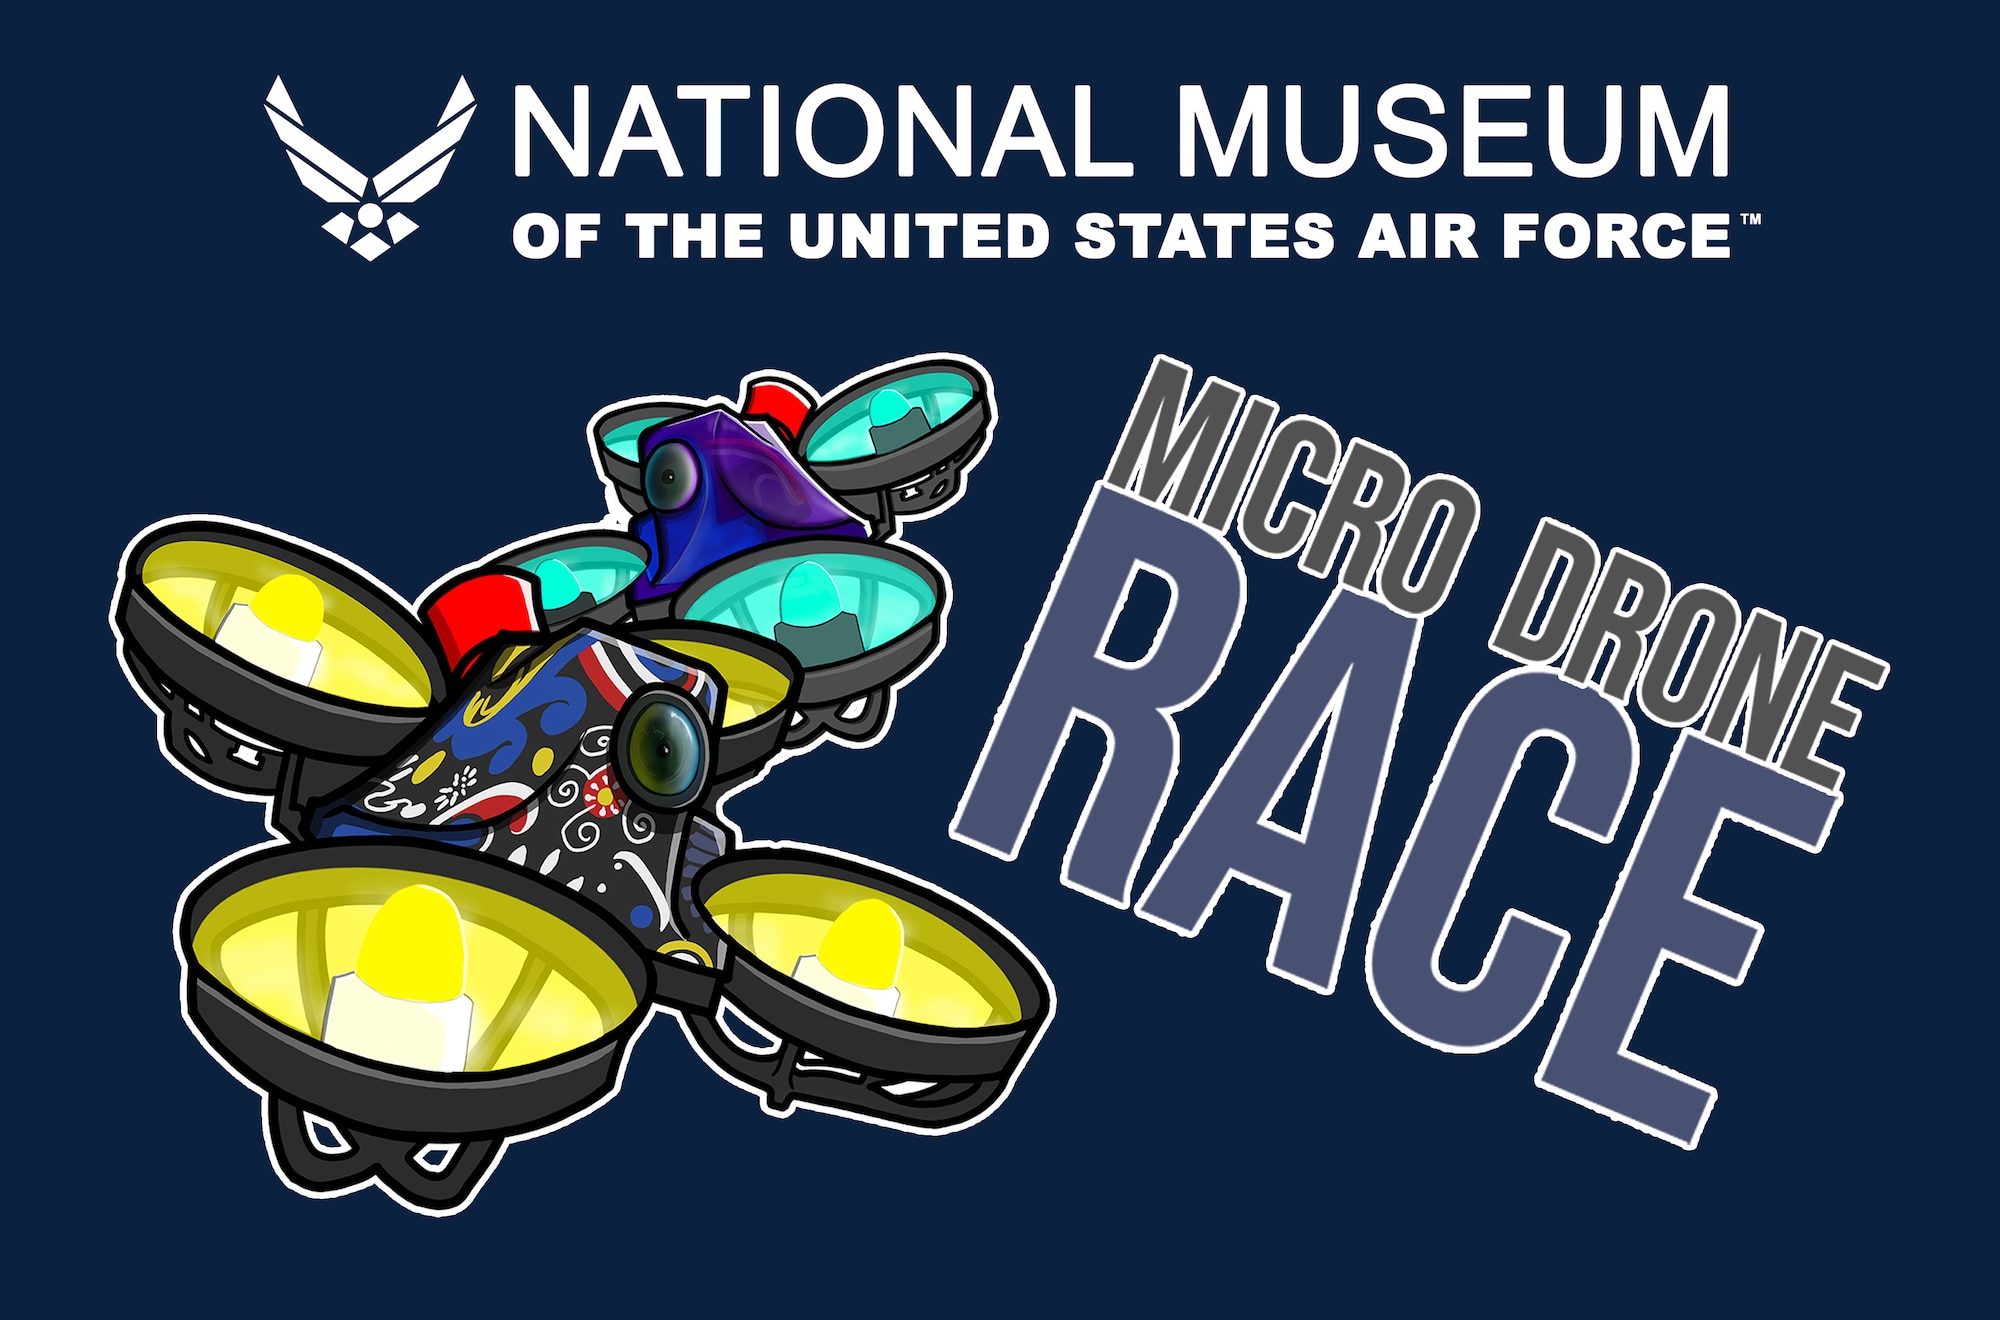 The graphic has a navy blue background with the logo for the National Museum of the United States Air Force in white; an illustration of two micro drones and the words "Micro Drone Race".